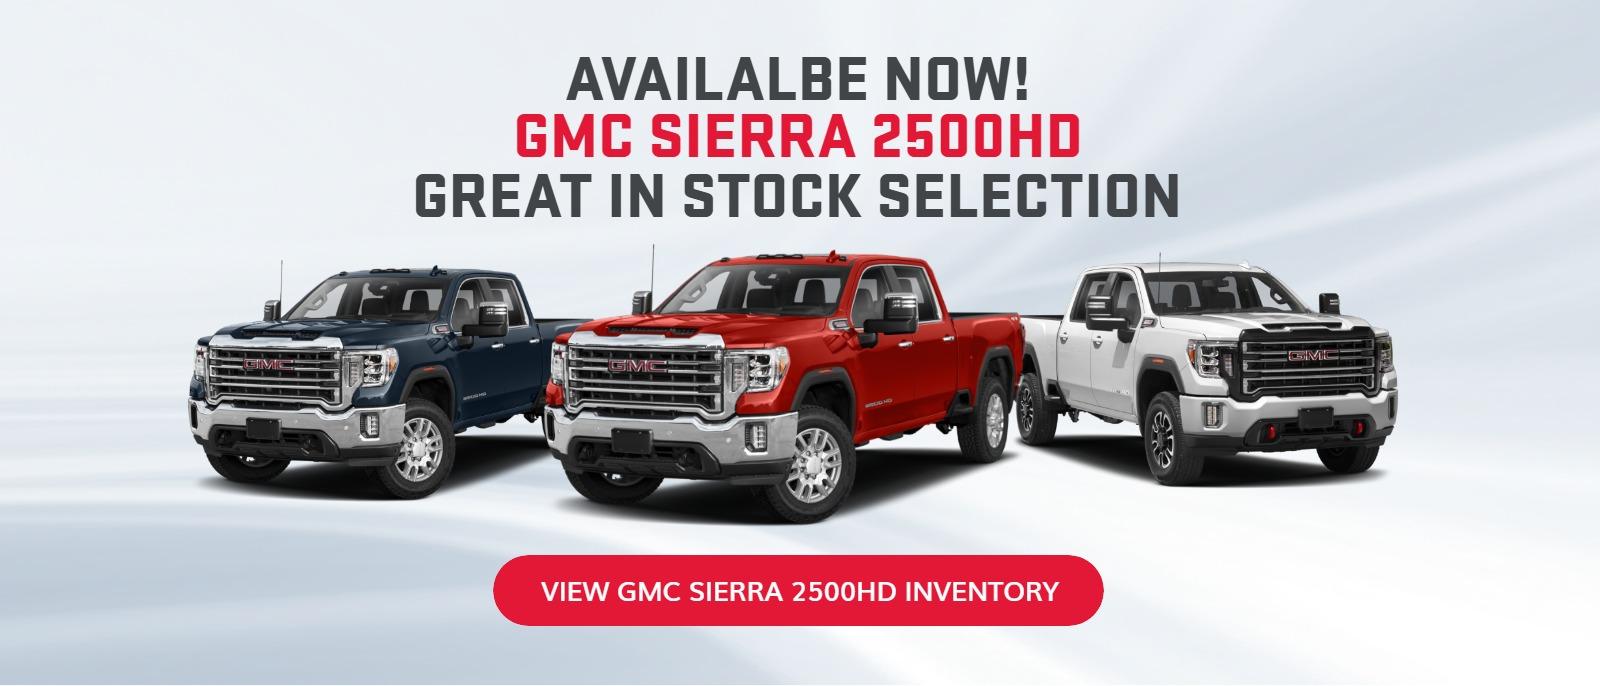 AVAILALBE NOW!
2022 AND 2023 GMC SIERRA 2500HD
GREAT IN STOCK SELECTION